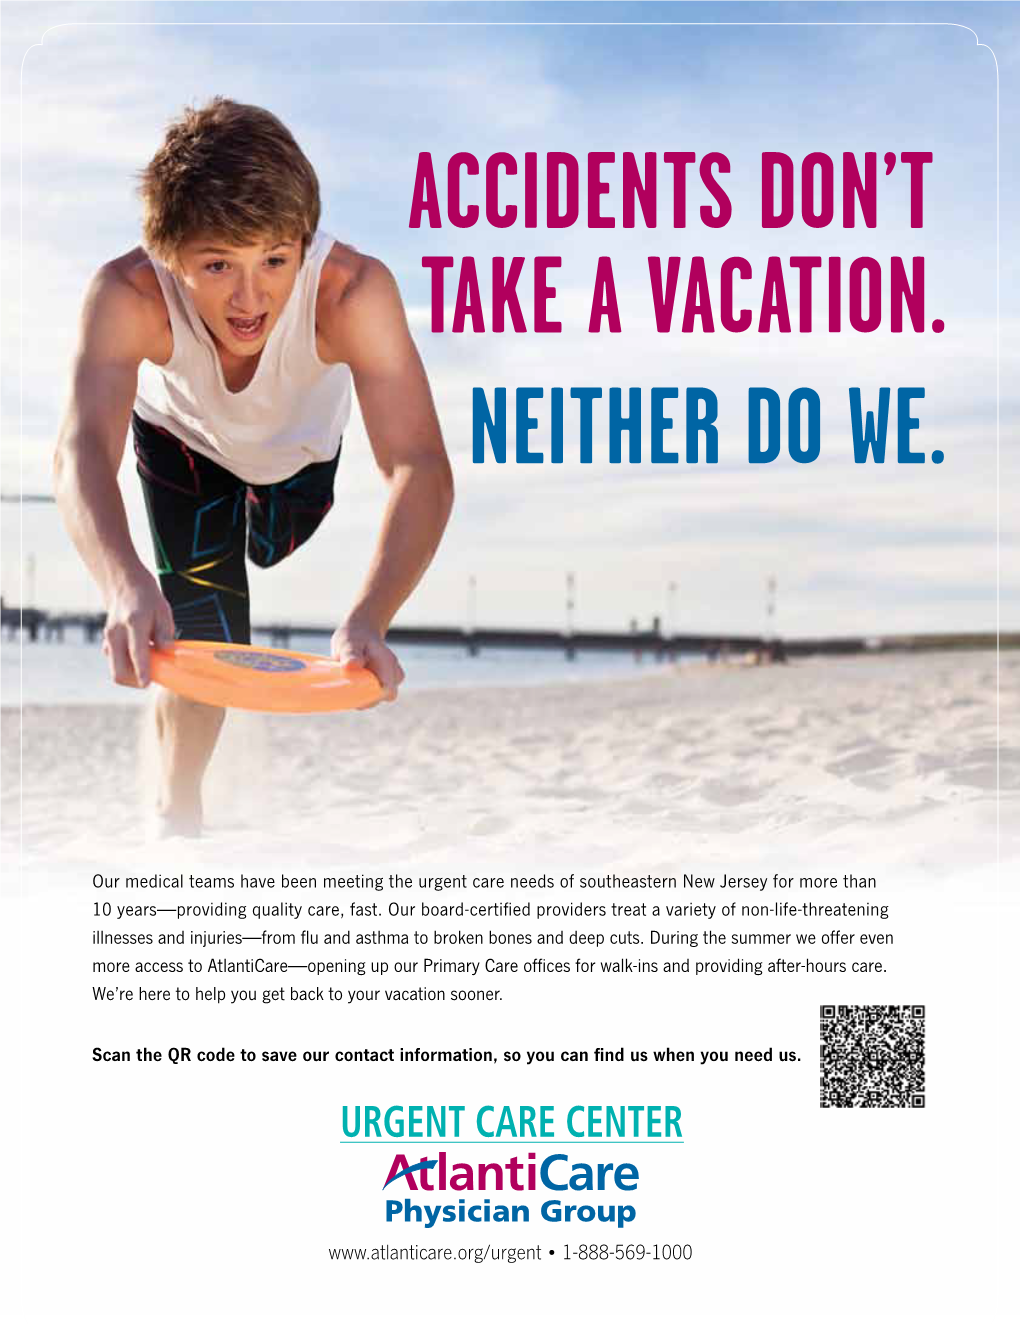 Accidents Don't Take a Vacation. Neither Do